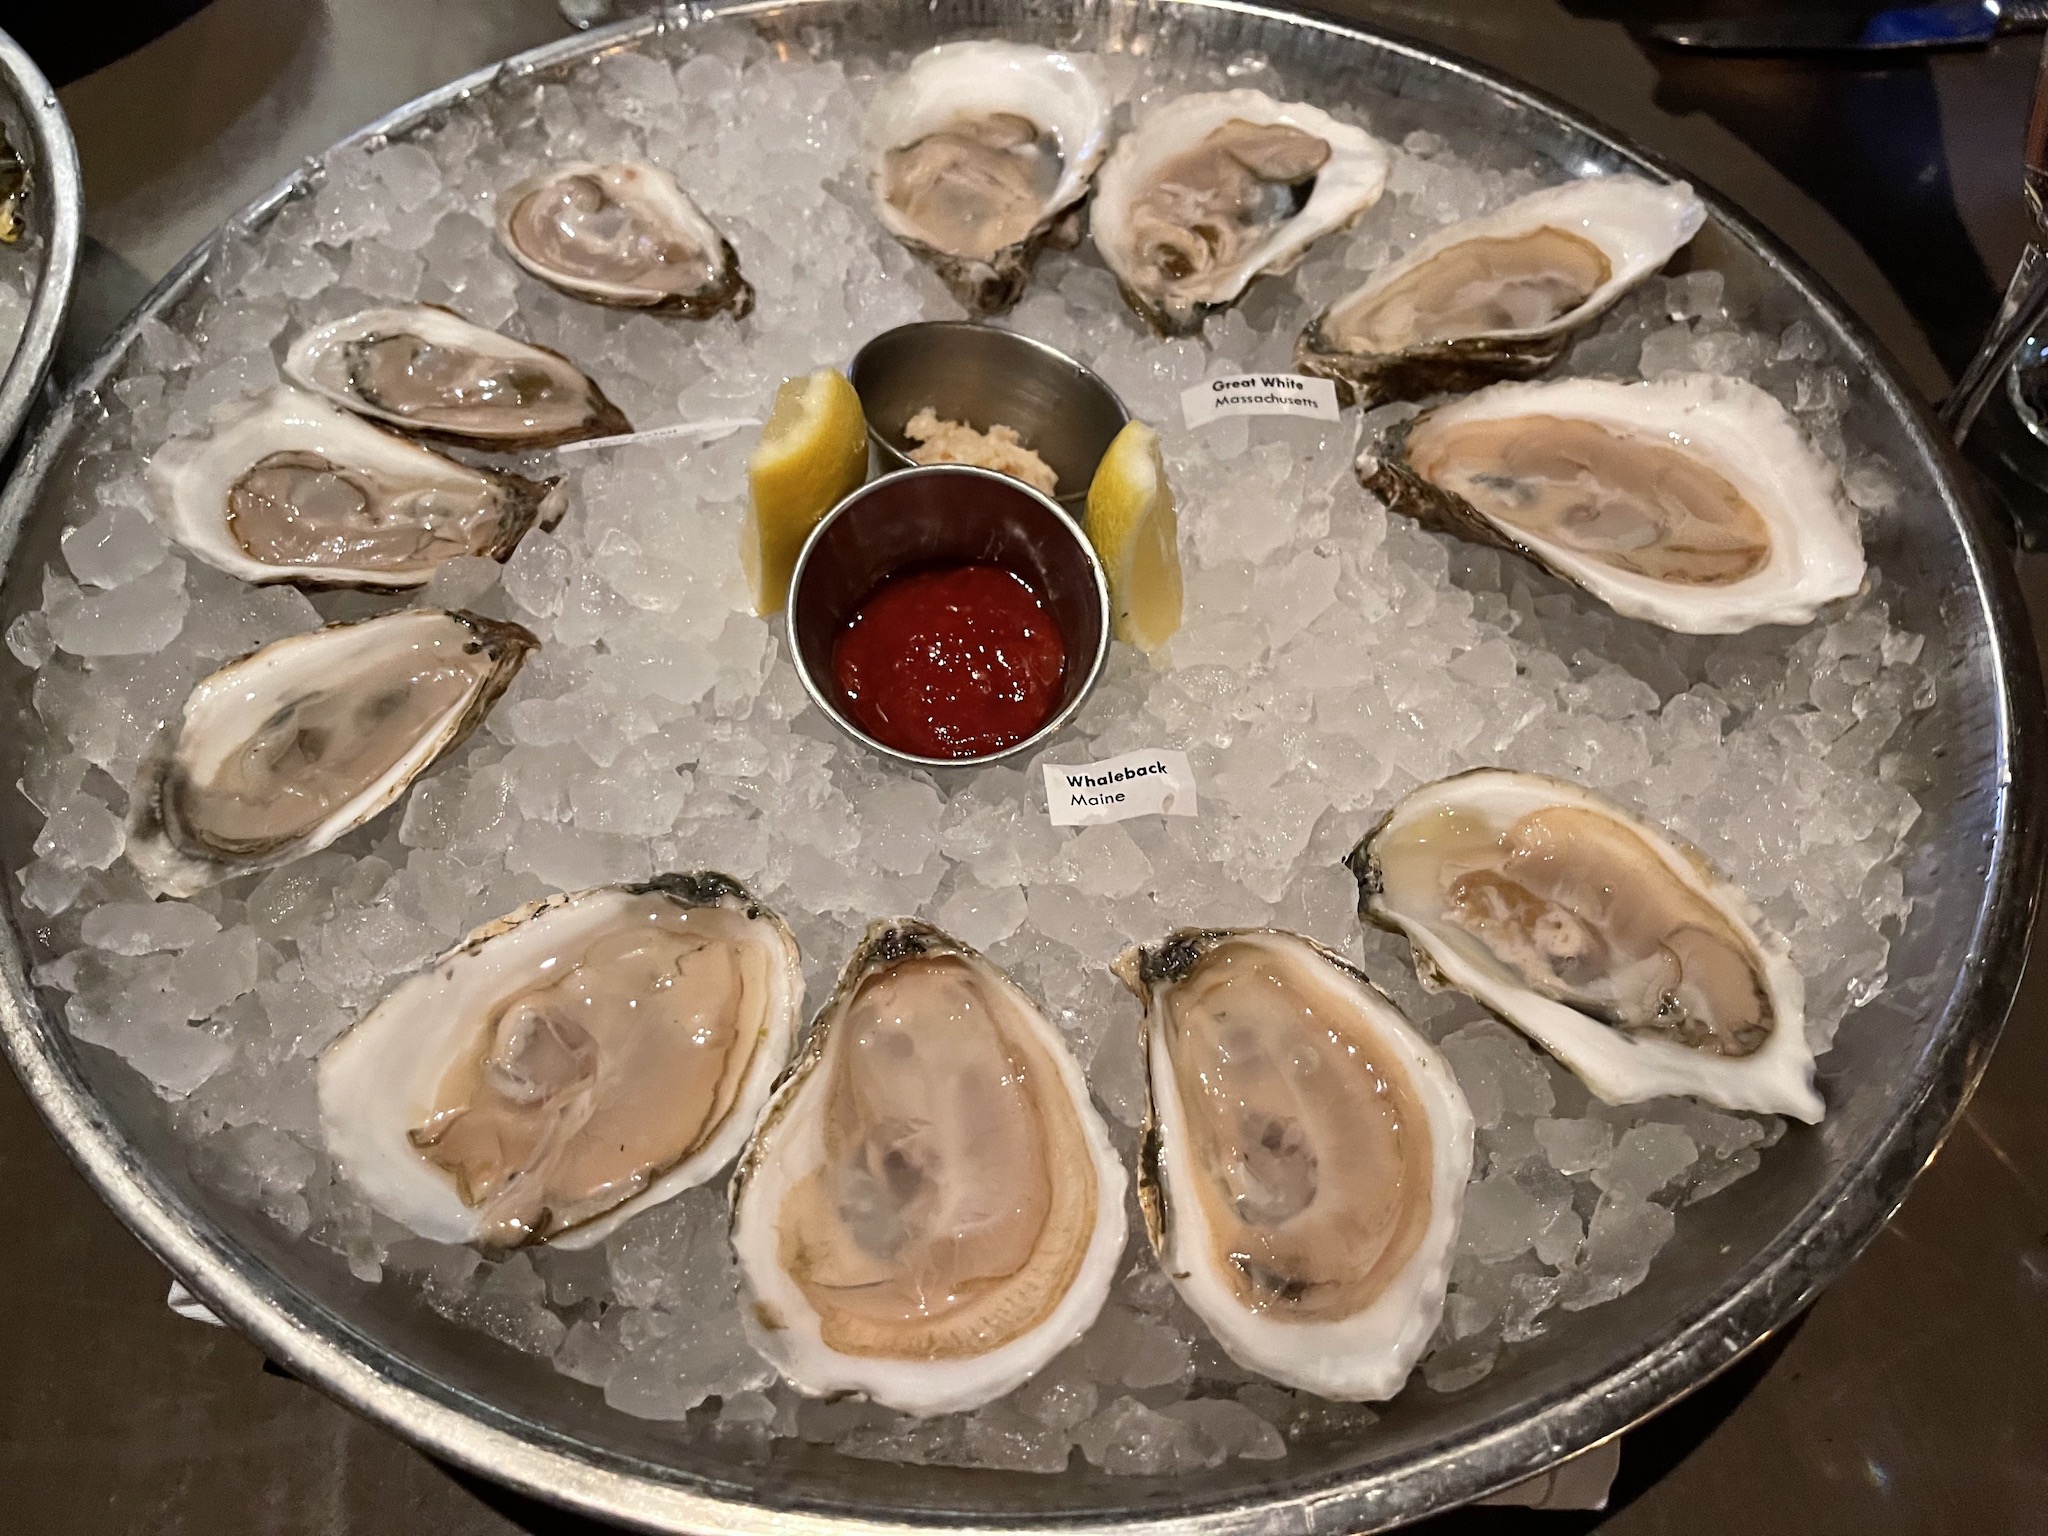 Sea Salt Dozen East Coast Oysters - Starting at the bottom with Whaleback from Maine, clockwise to the Beau Soleil from New Brunswick and next Great White from Massacusetts